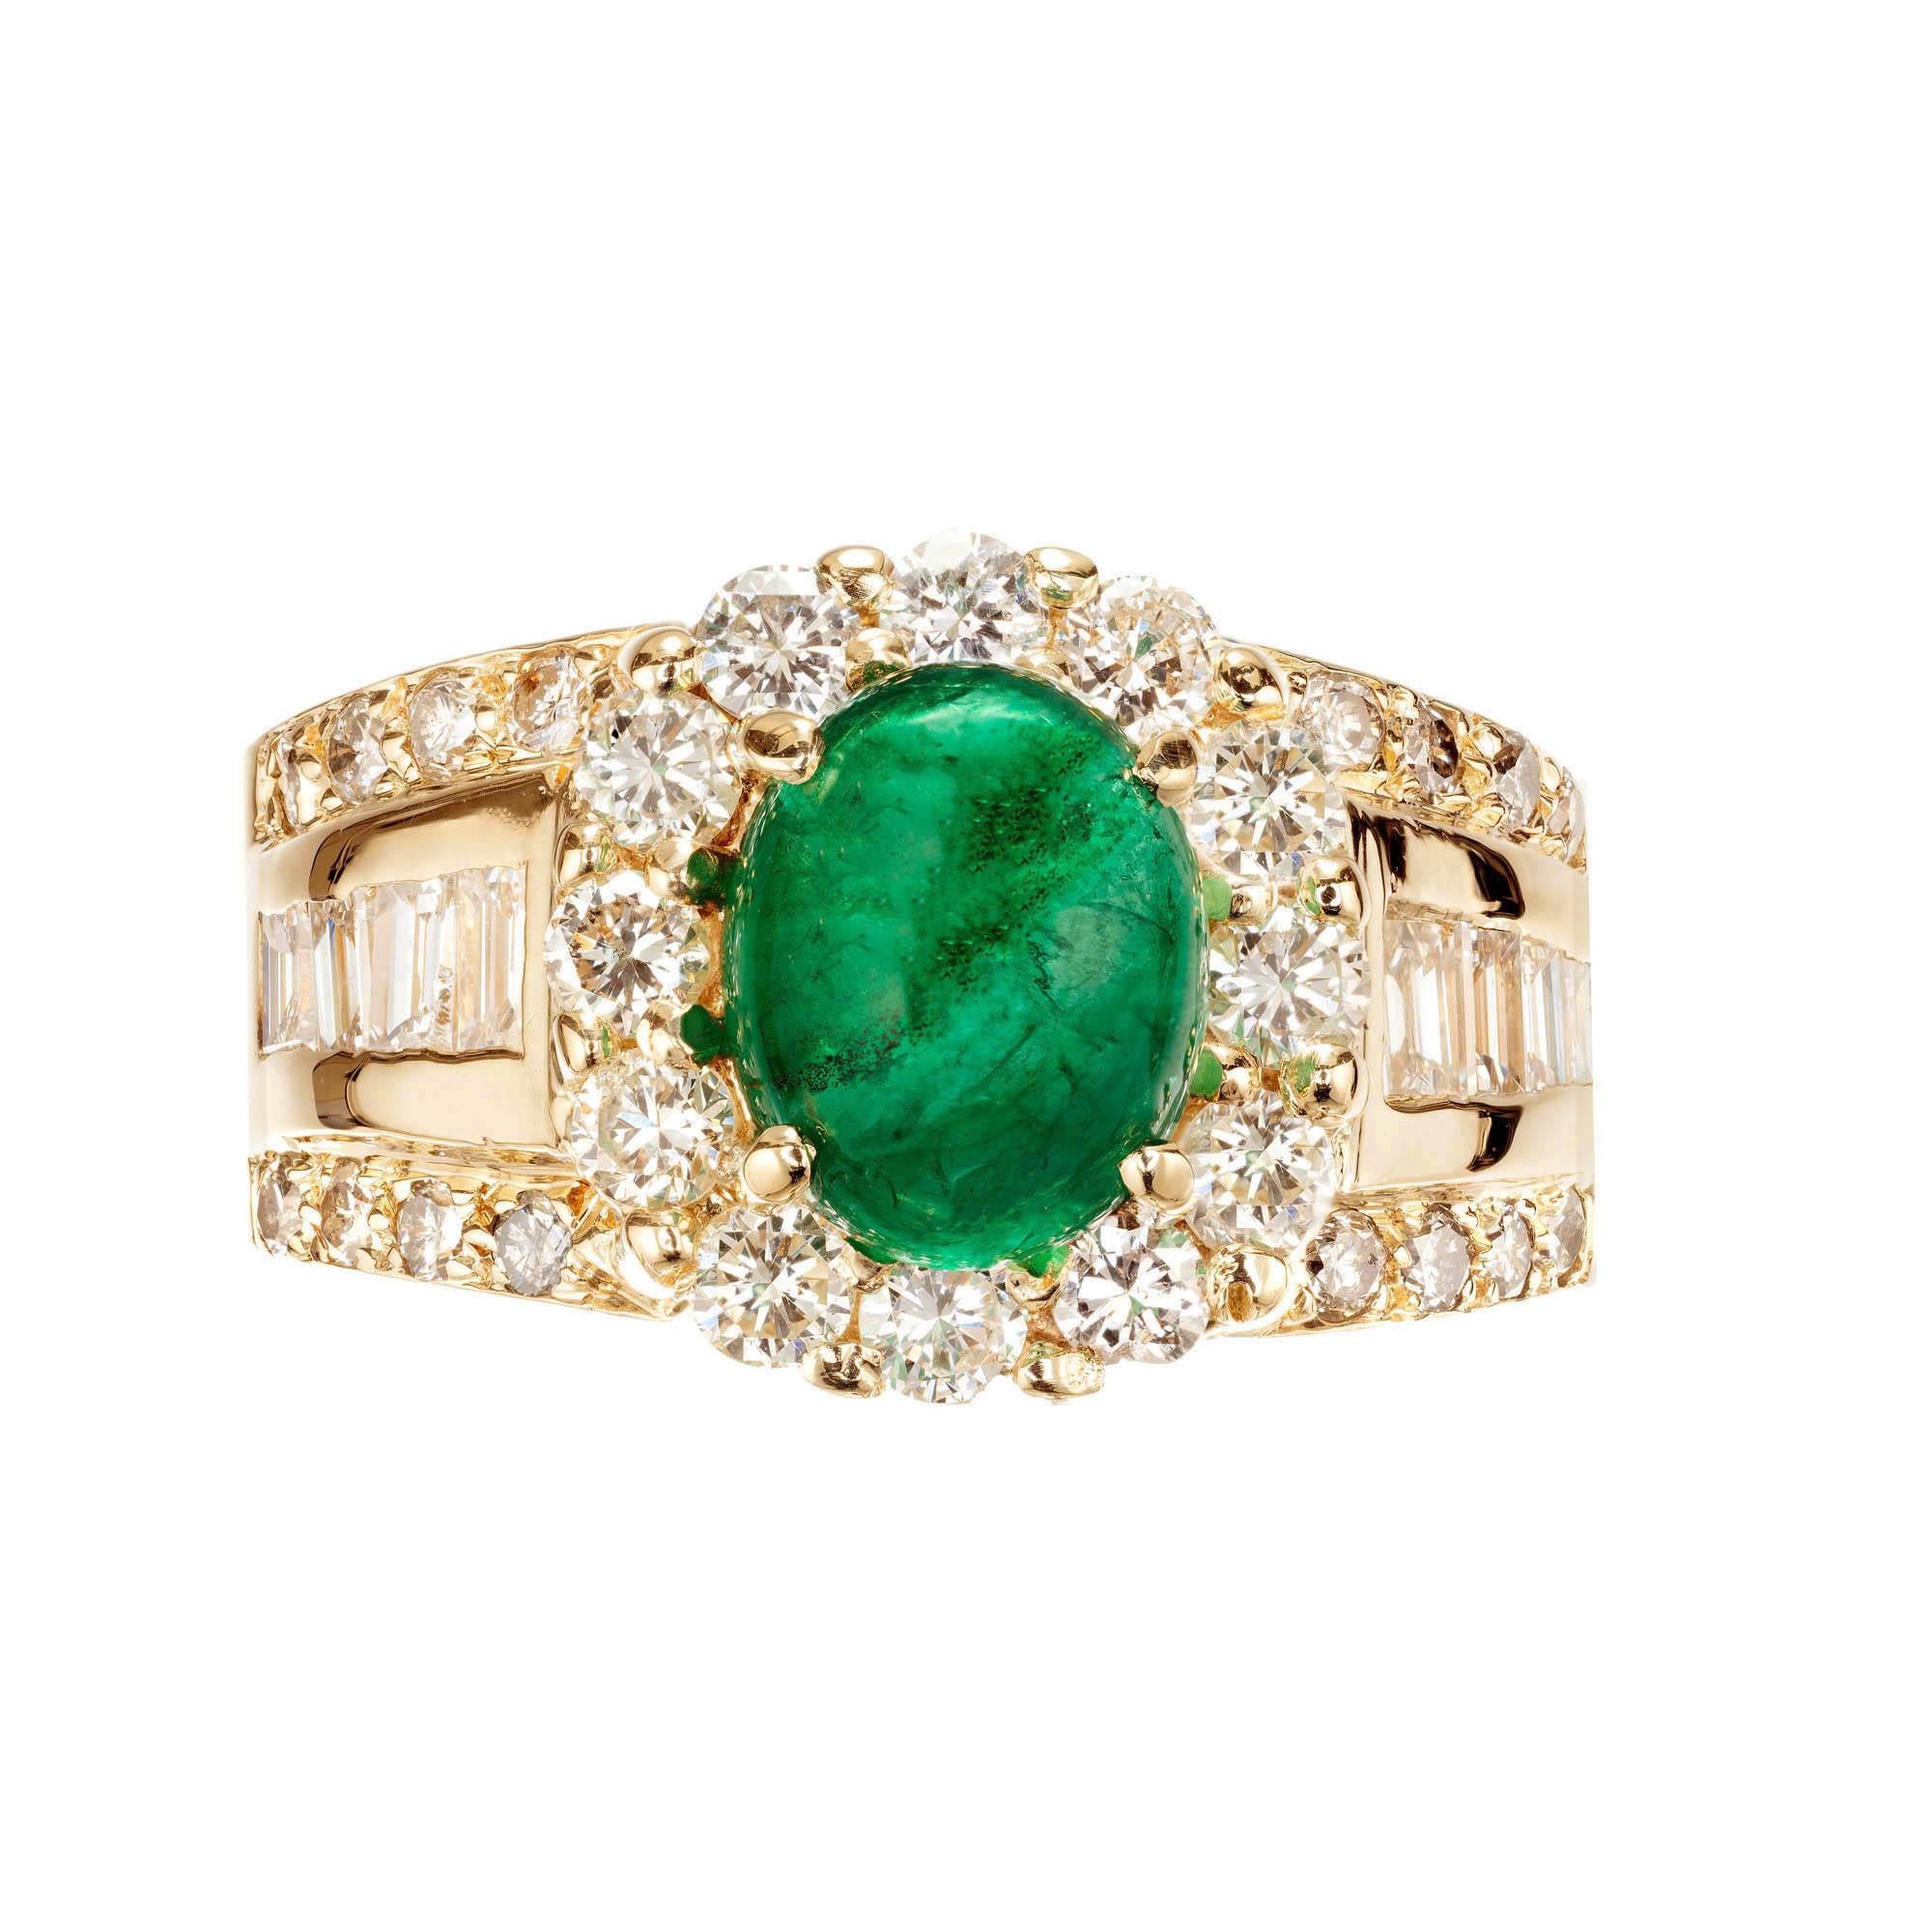 GIA certified natural cabochon green emerald and diamond cocktail ring. Oval emerald center stone, surrounded by round and baguette diamonds in a 14k yellow gold setting. 

1 oval cabochon green emerald, Approximate 2.00 Carats. Gia certificate #